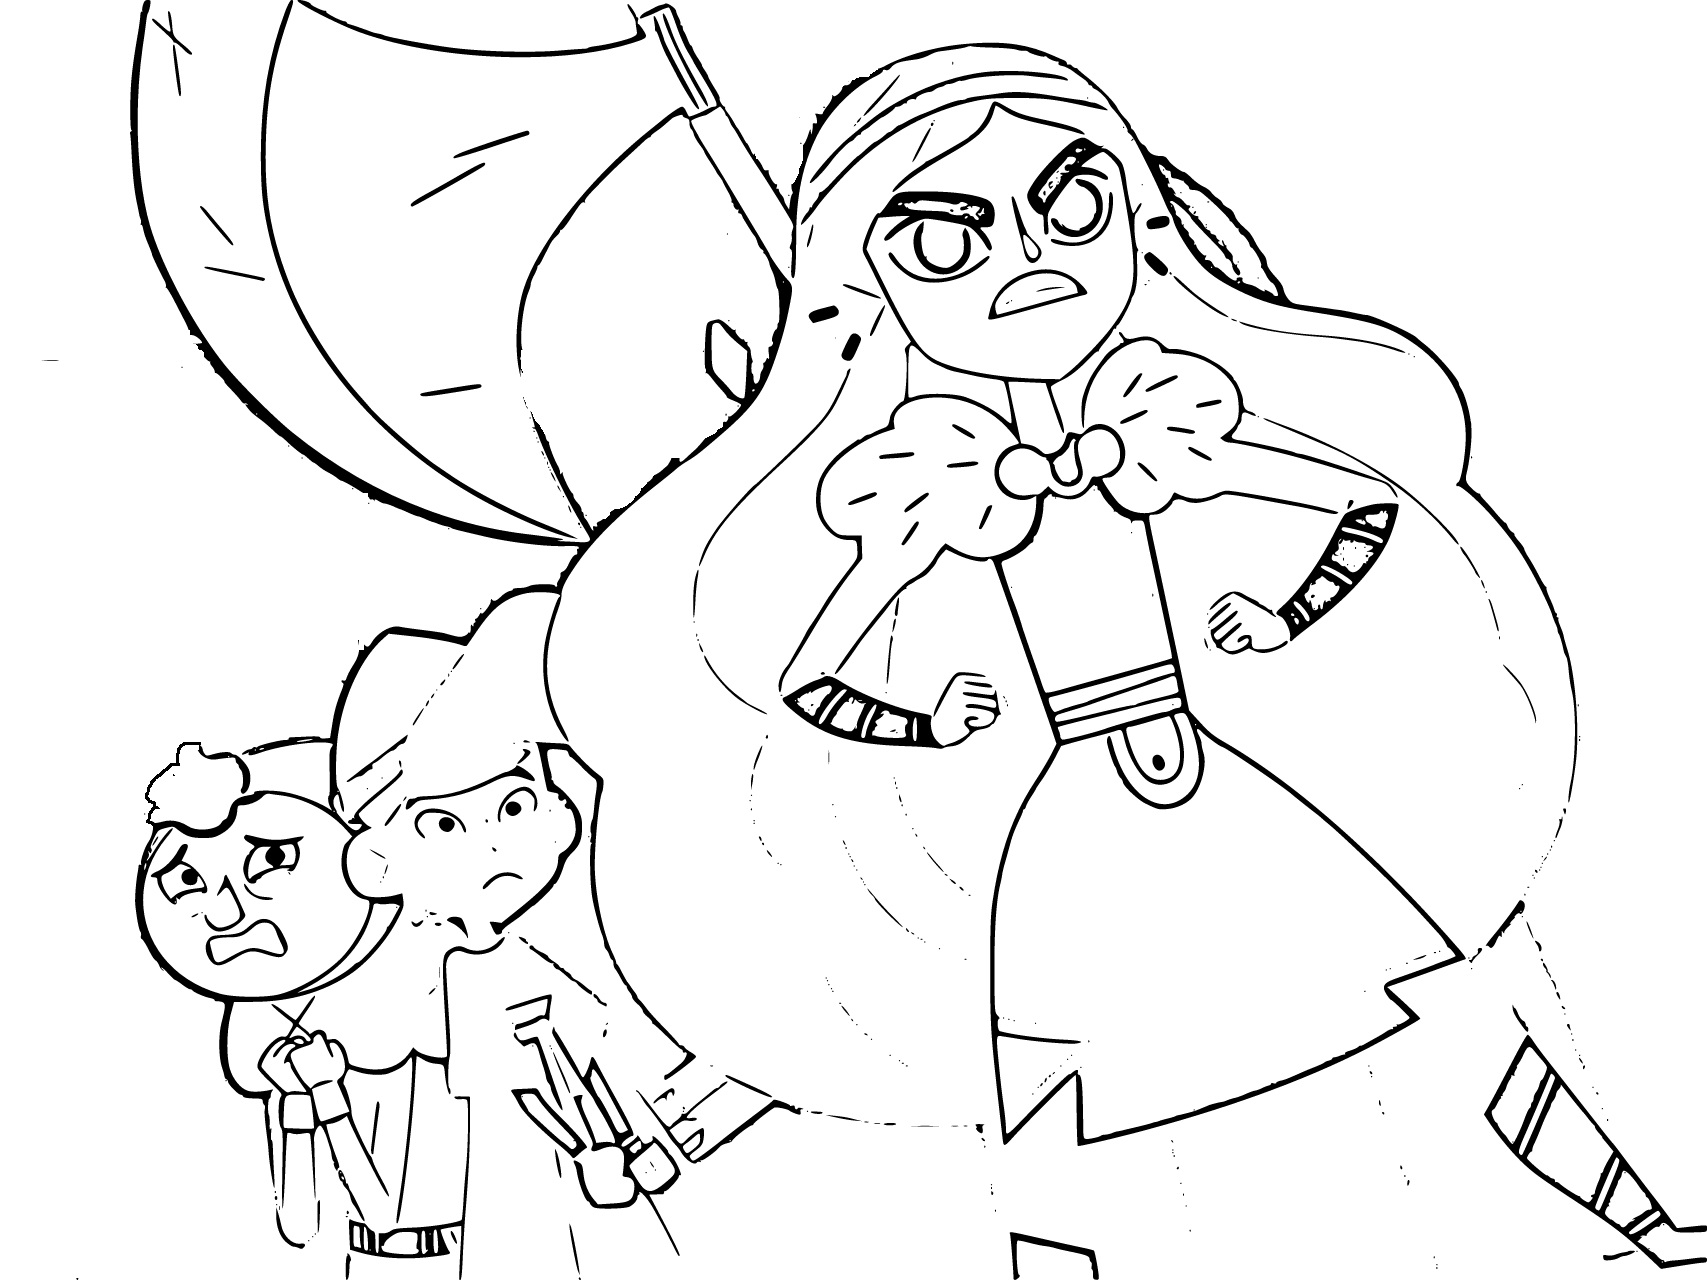 Printable Ylva is Angry! Coloring Page for kids.